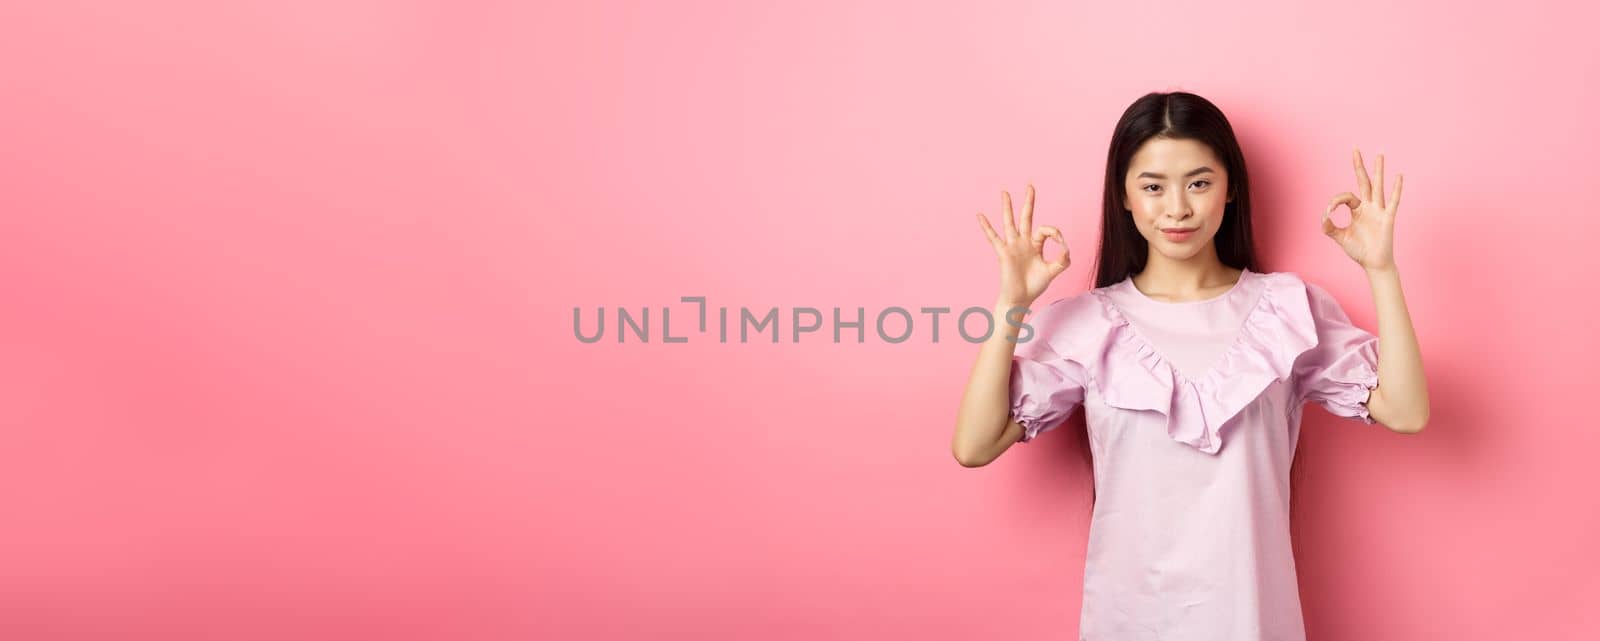 Smiling asian woman showing okay signs and looking confident, assure all good, praise good work, nice choice gesture, standing on pink background.